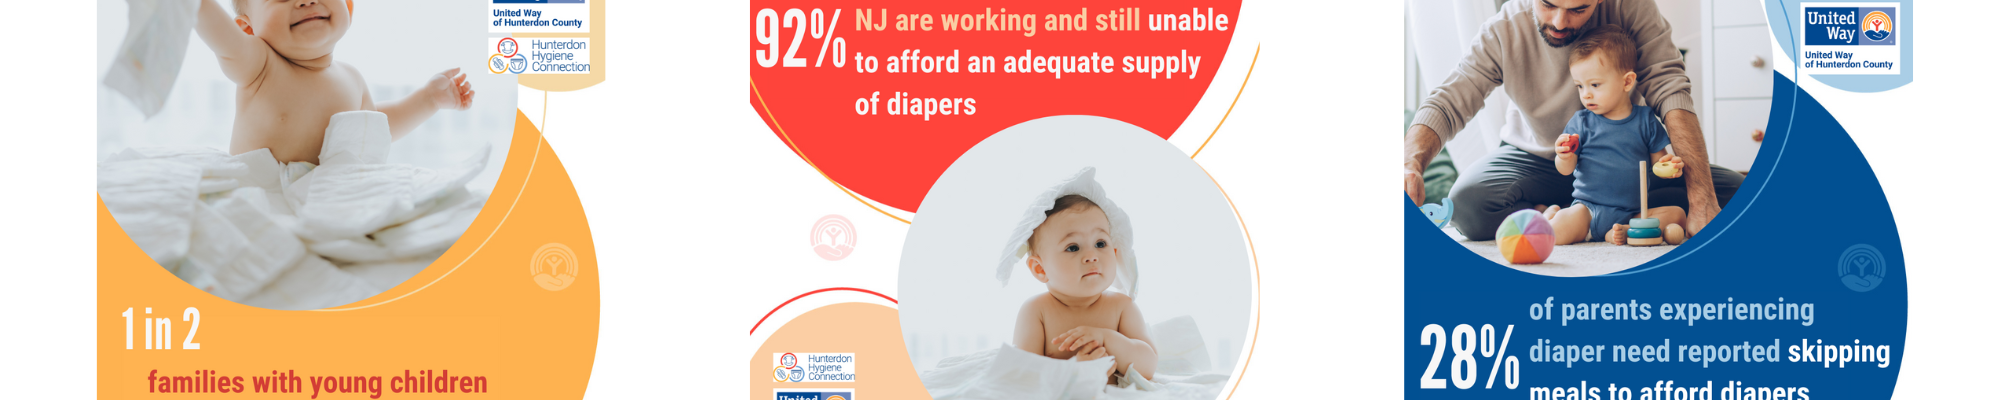 main diaper insecurity facts